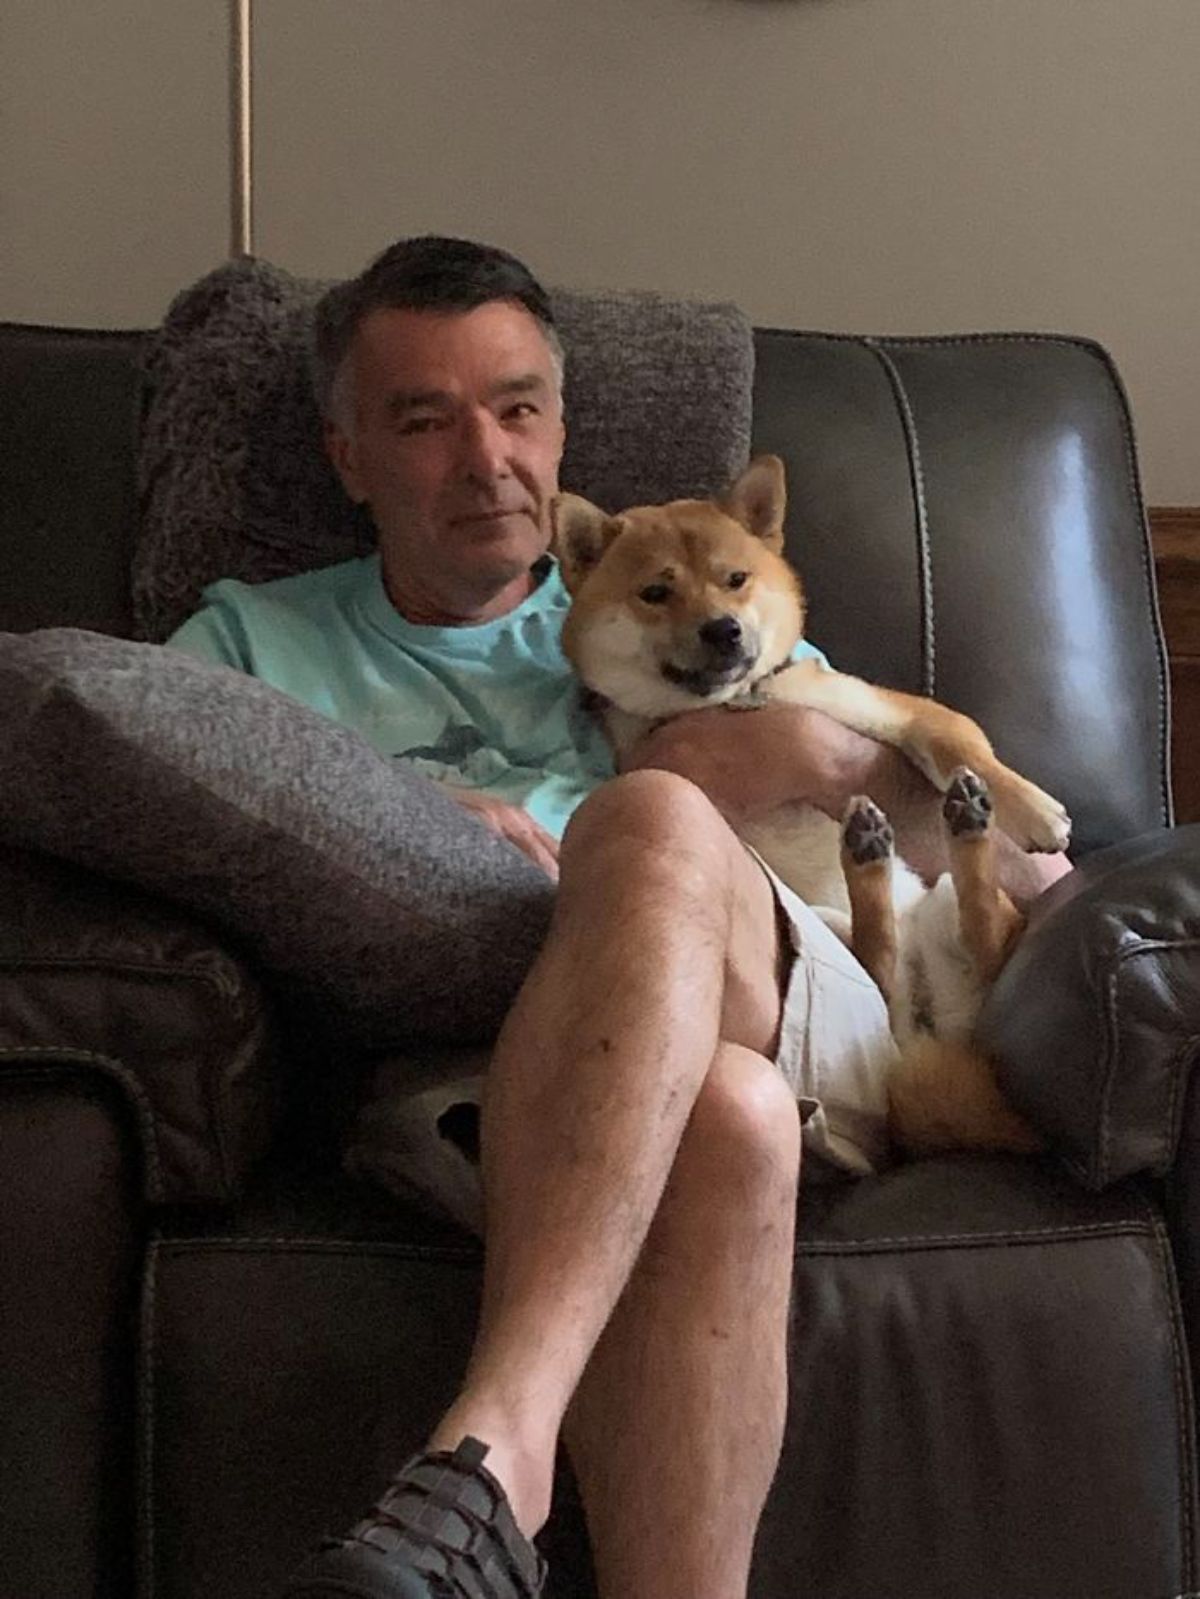 brown and white shiba inu sitting up and being hugged by an old man sitting on a black sofa